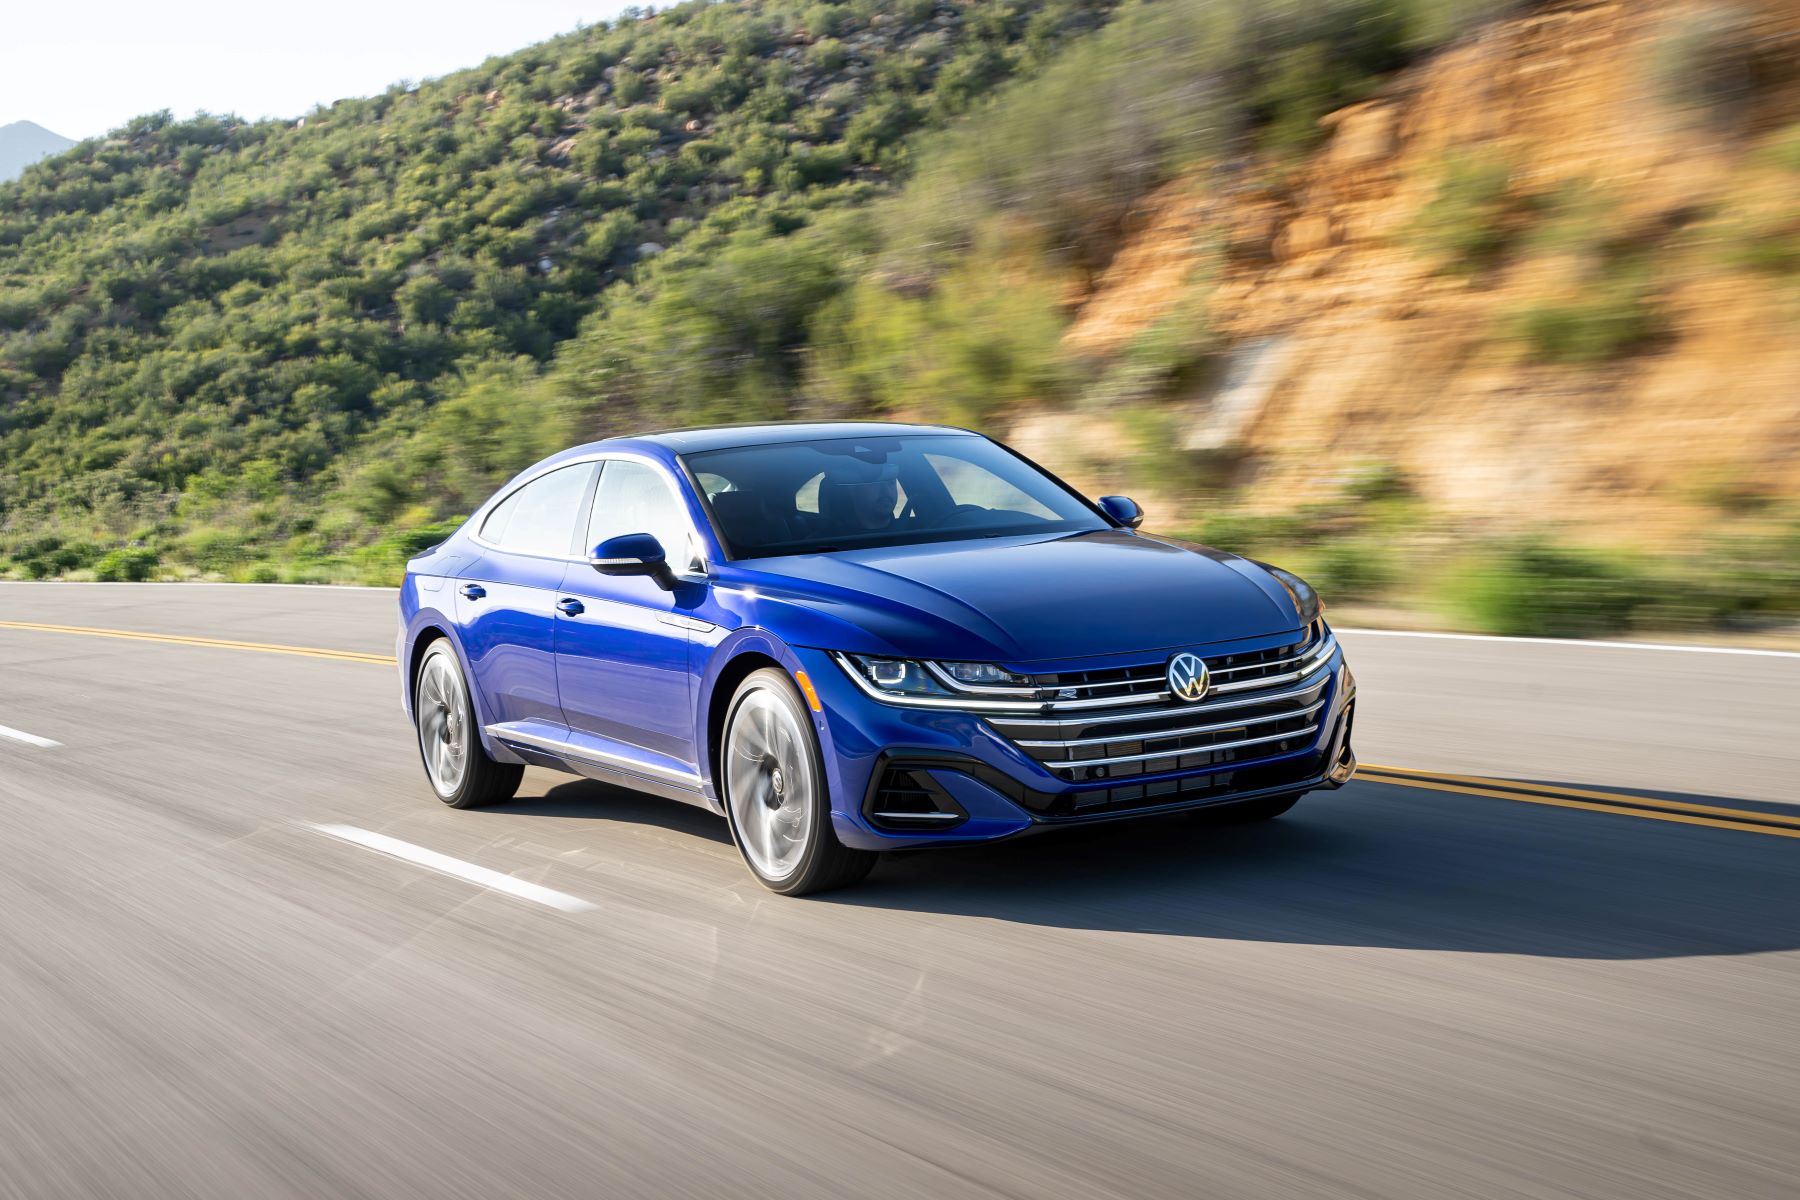 Is the Volkswagen Arteon a Luxurious Automobile?